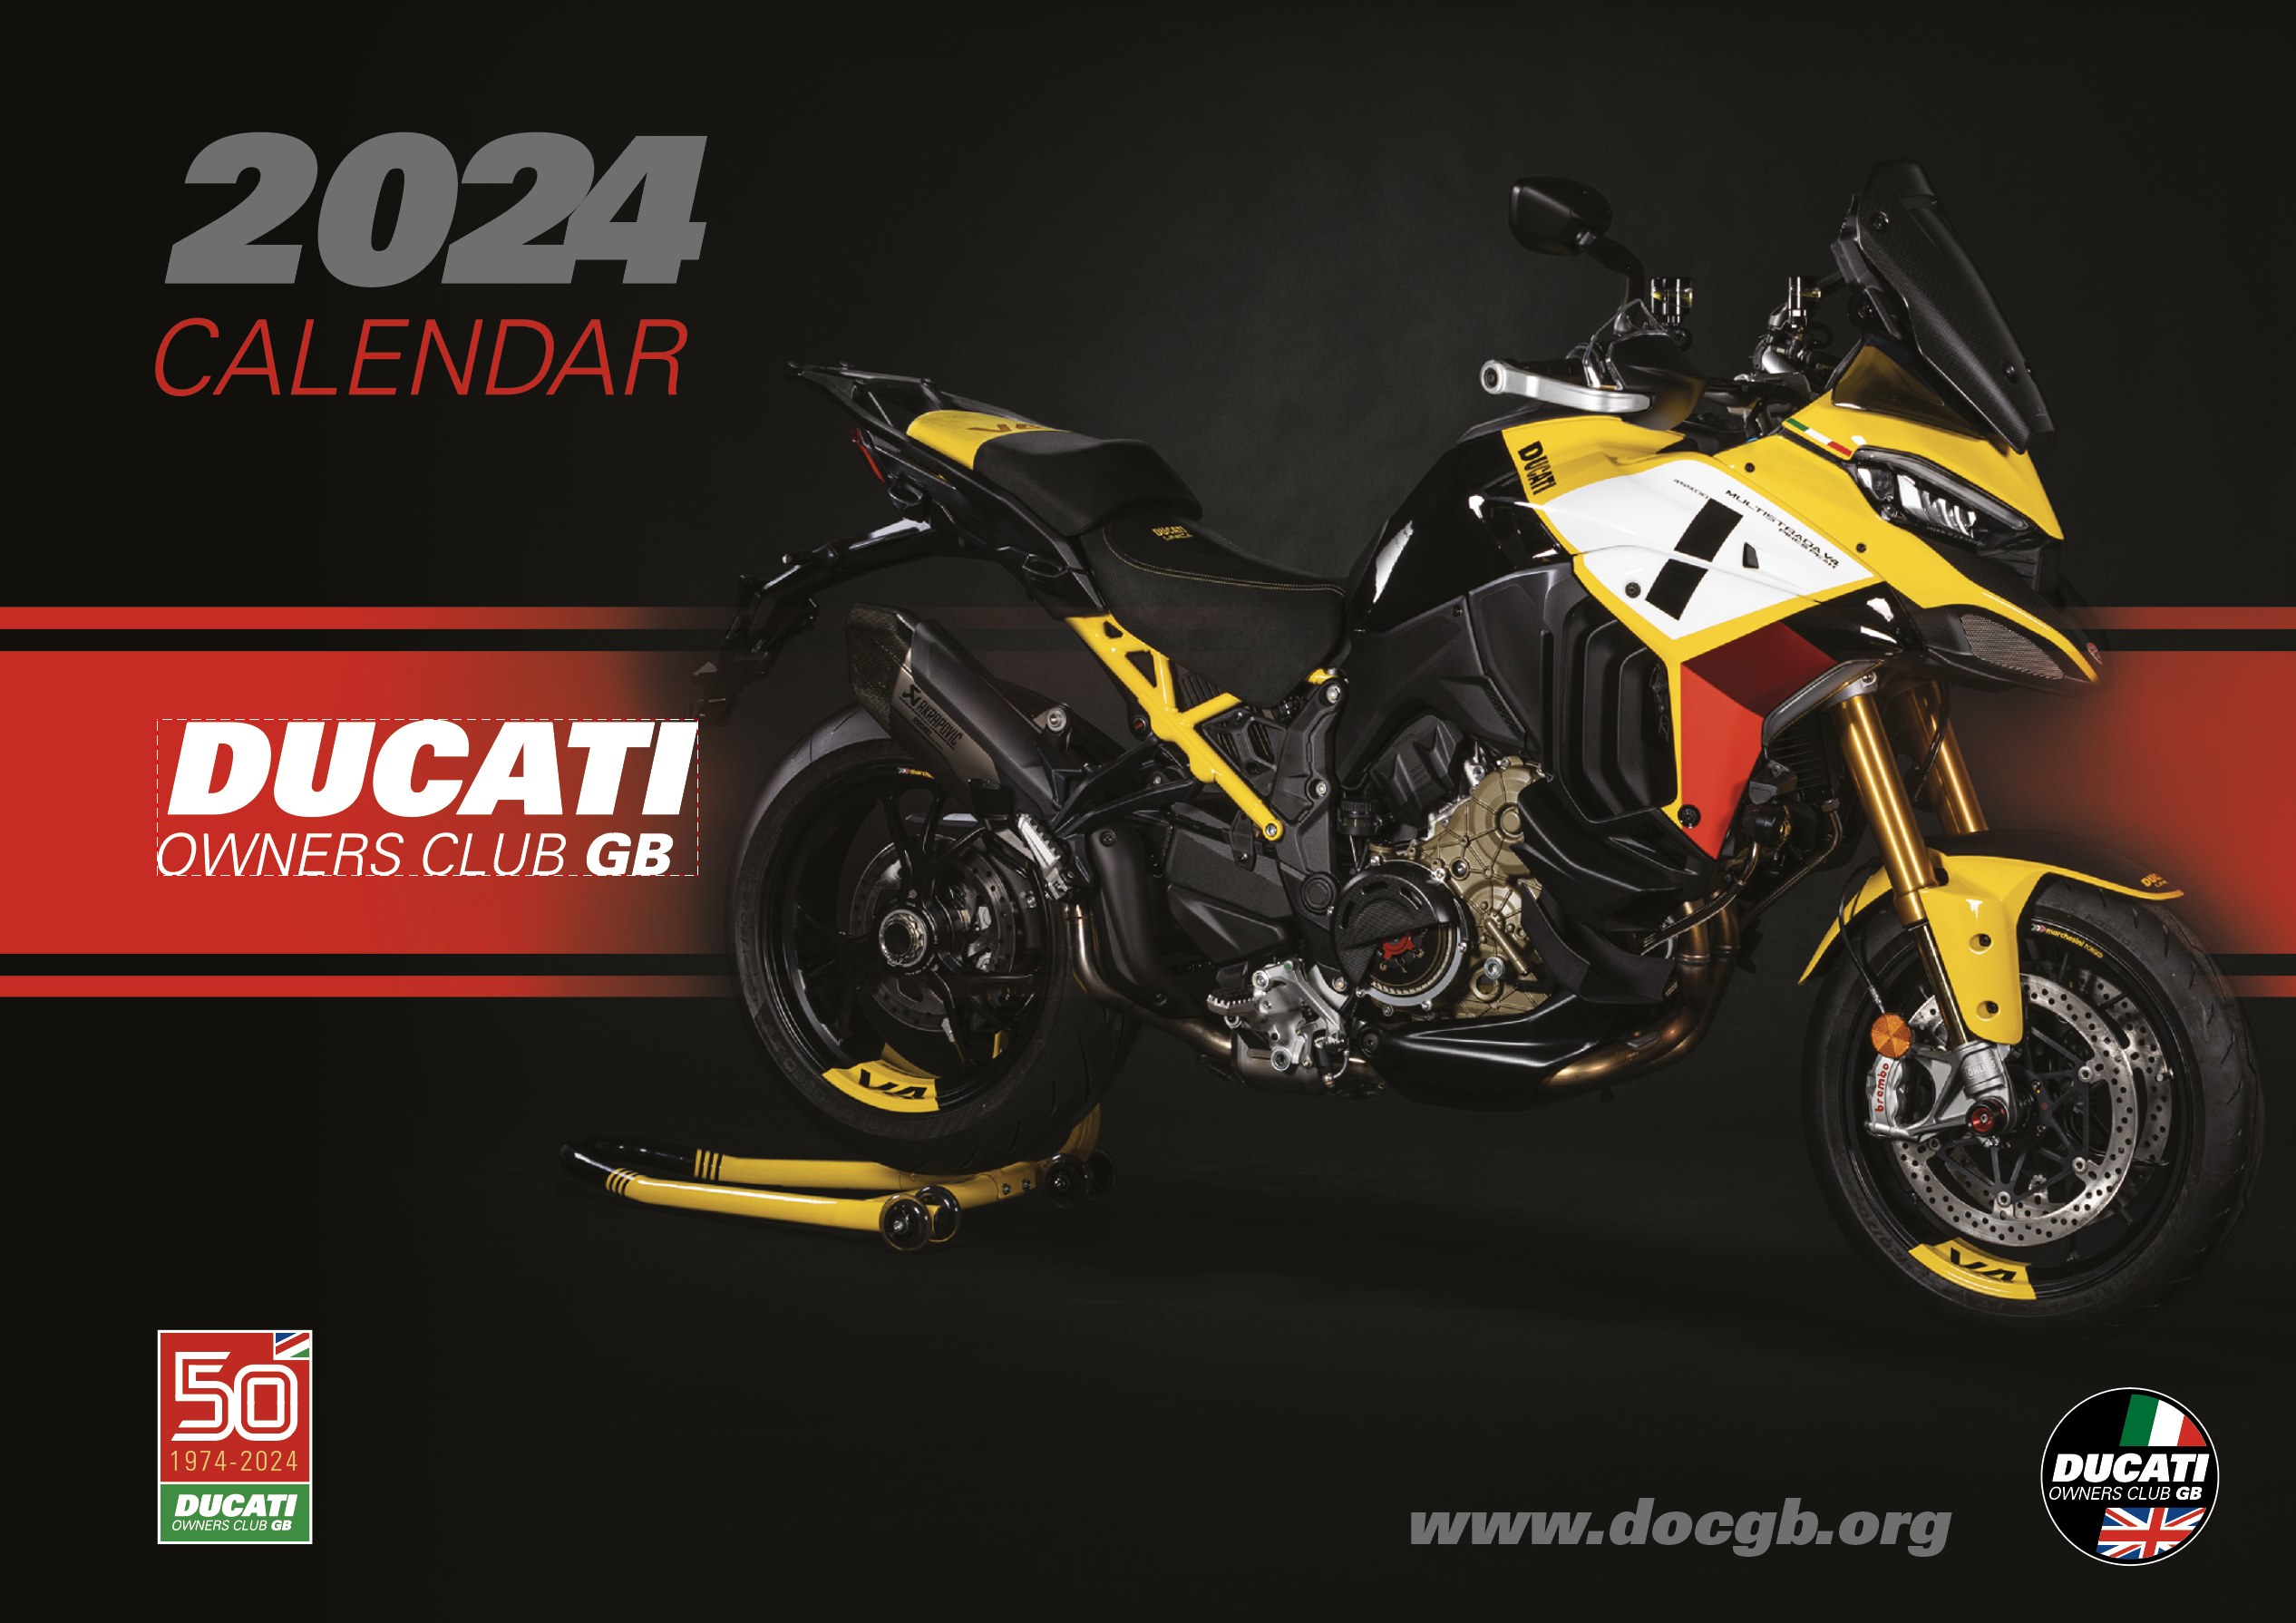 Ducati Owners Club GB Official 2024 Calendar cover